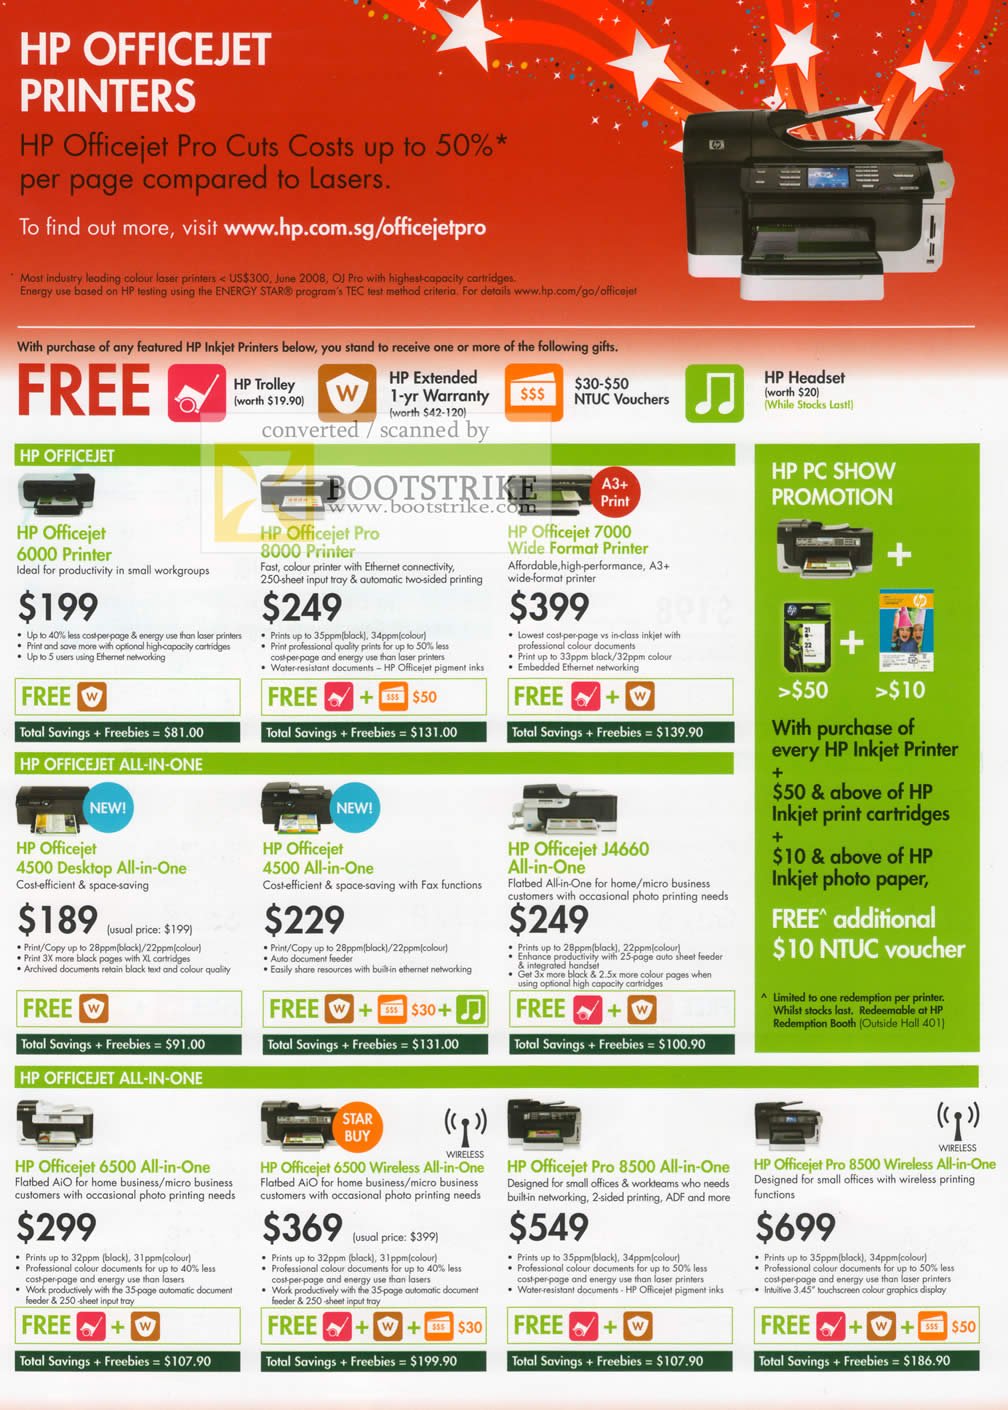 PC Show 2010 price list image brochure of HP Officejet Printers Pro 6000 8000 7000 4500 AIO J4660 6500 8500